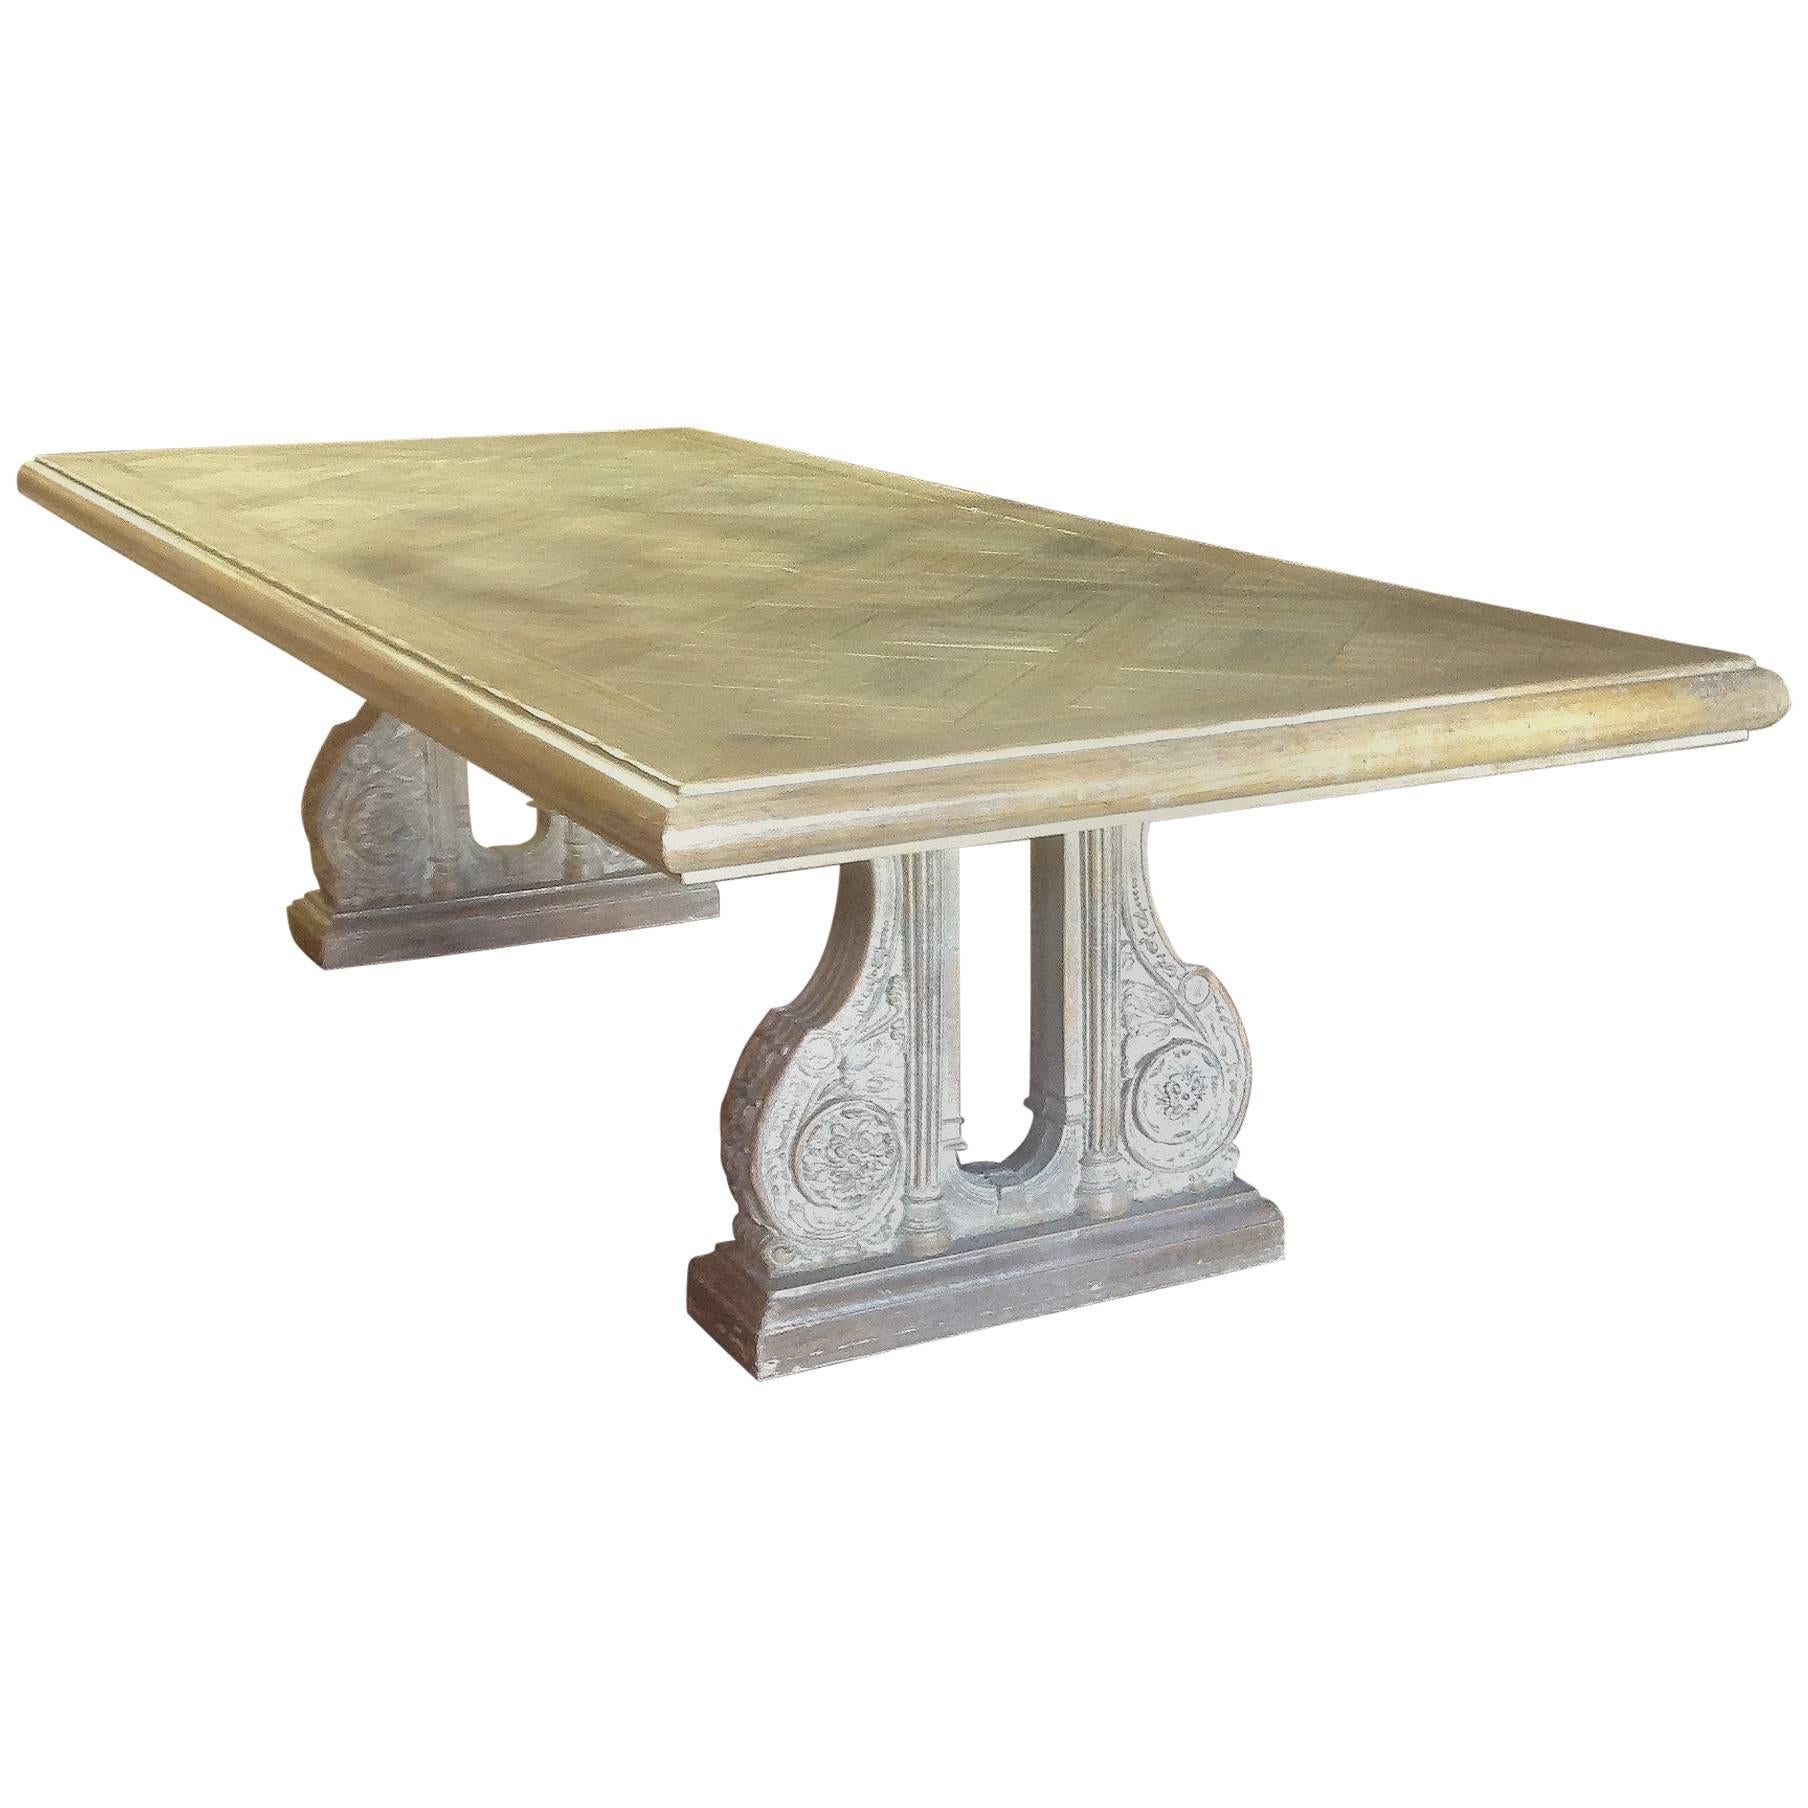 Phyllis Morris Bleached Oak Parquetry Top Double Pedestal Dining Table For Sale